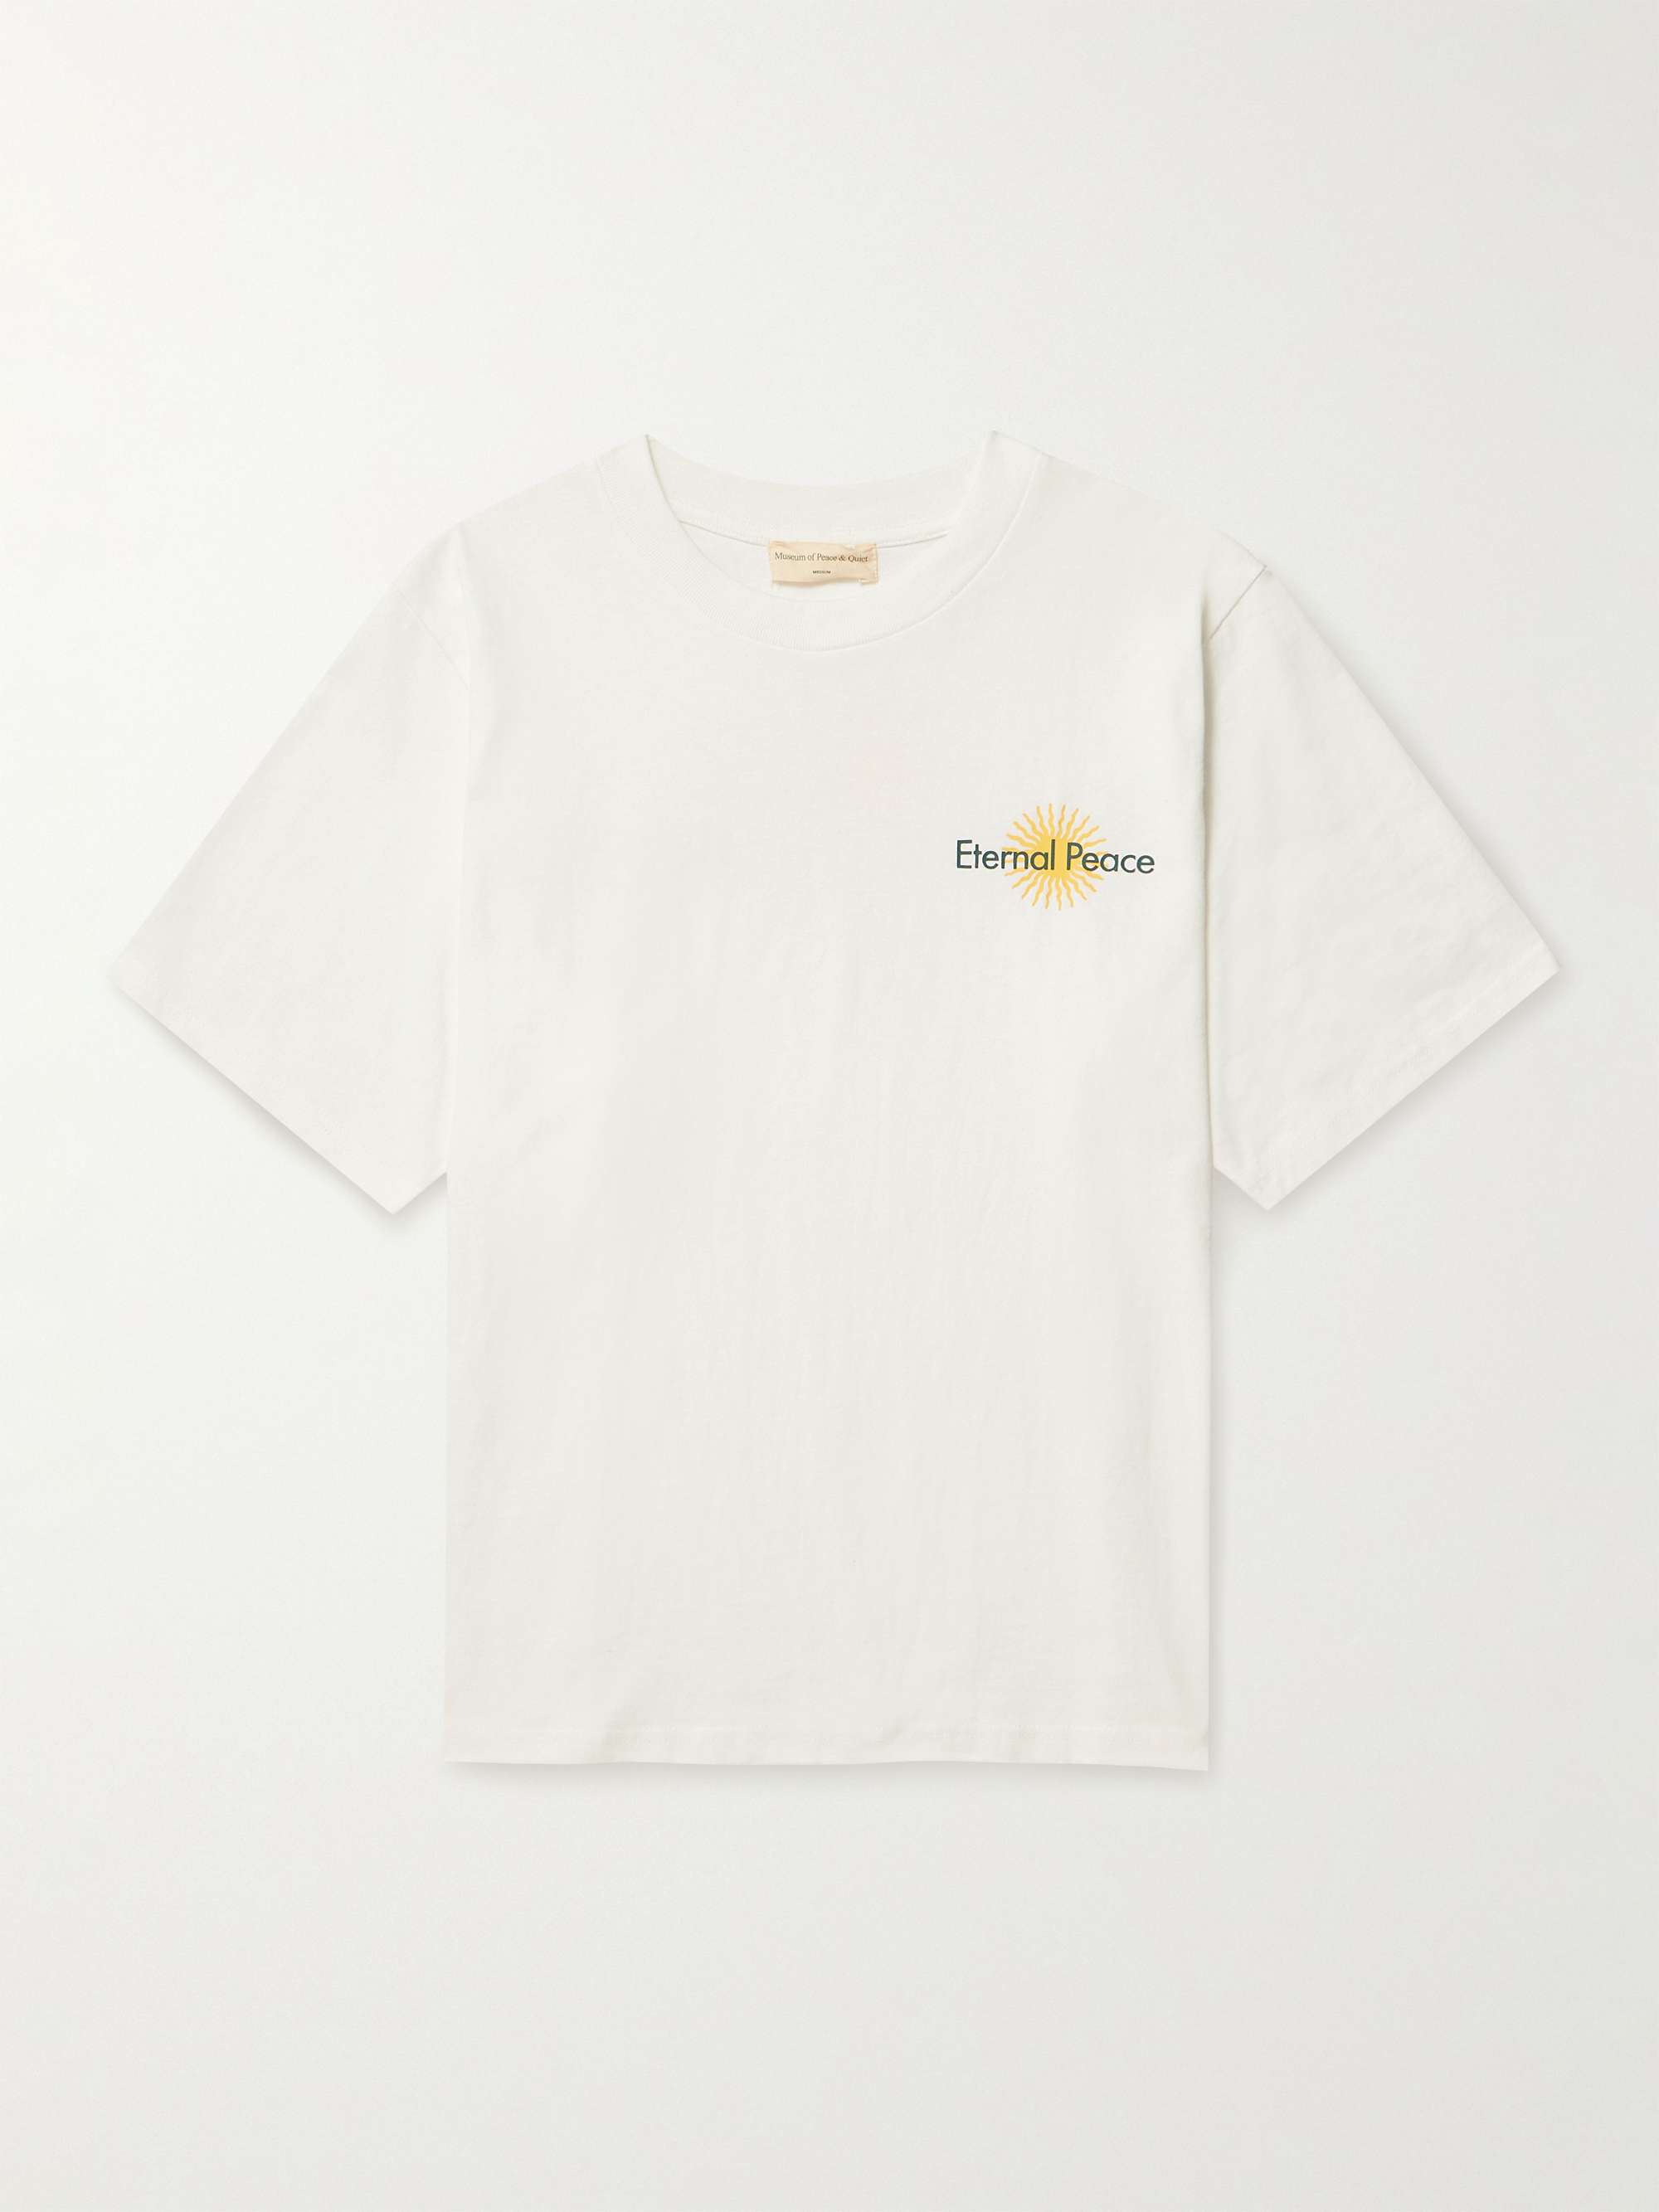 MUSEUM OF PEACE & QUIET Eternal Peace Printed Cotton-Jersey T-Shirt